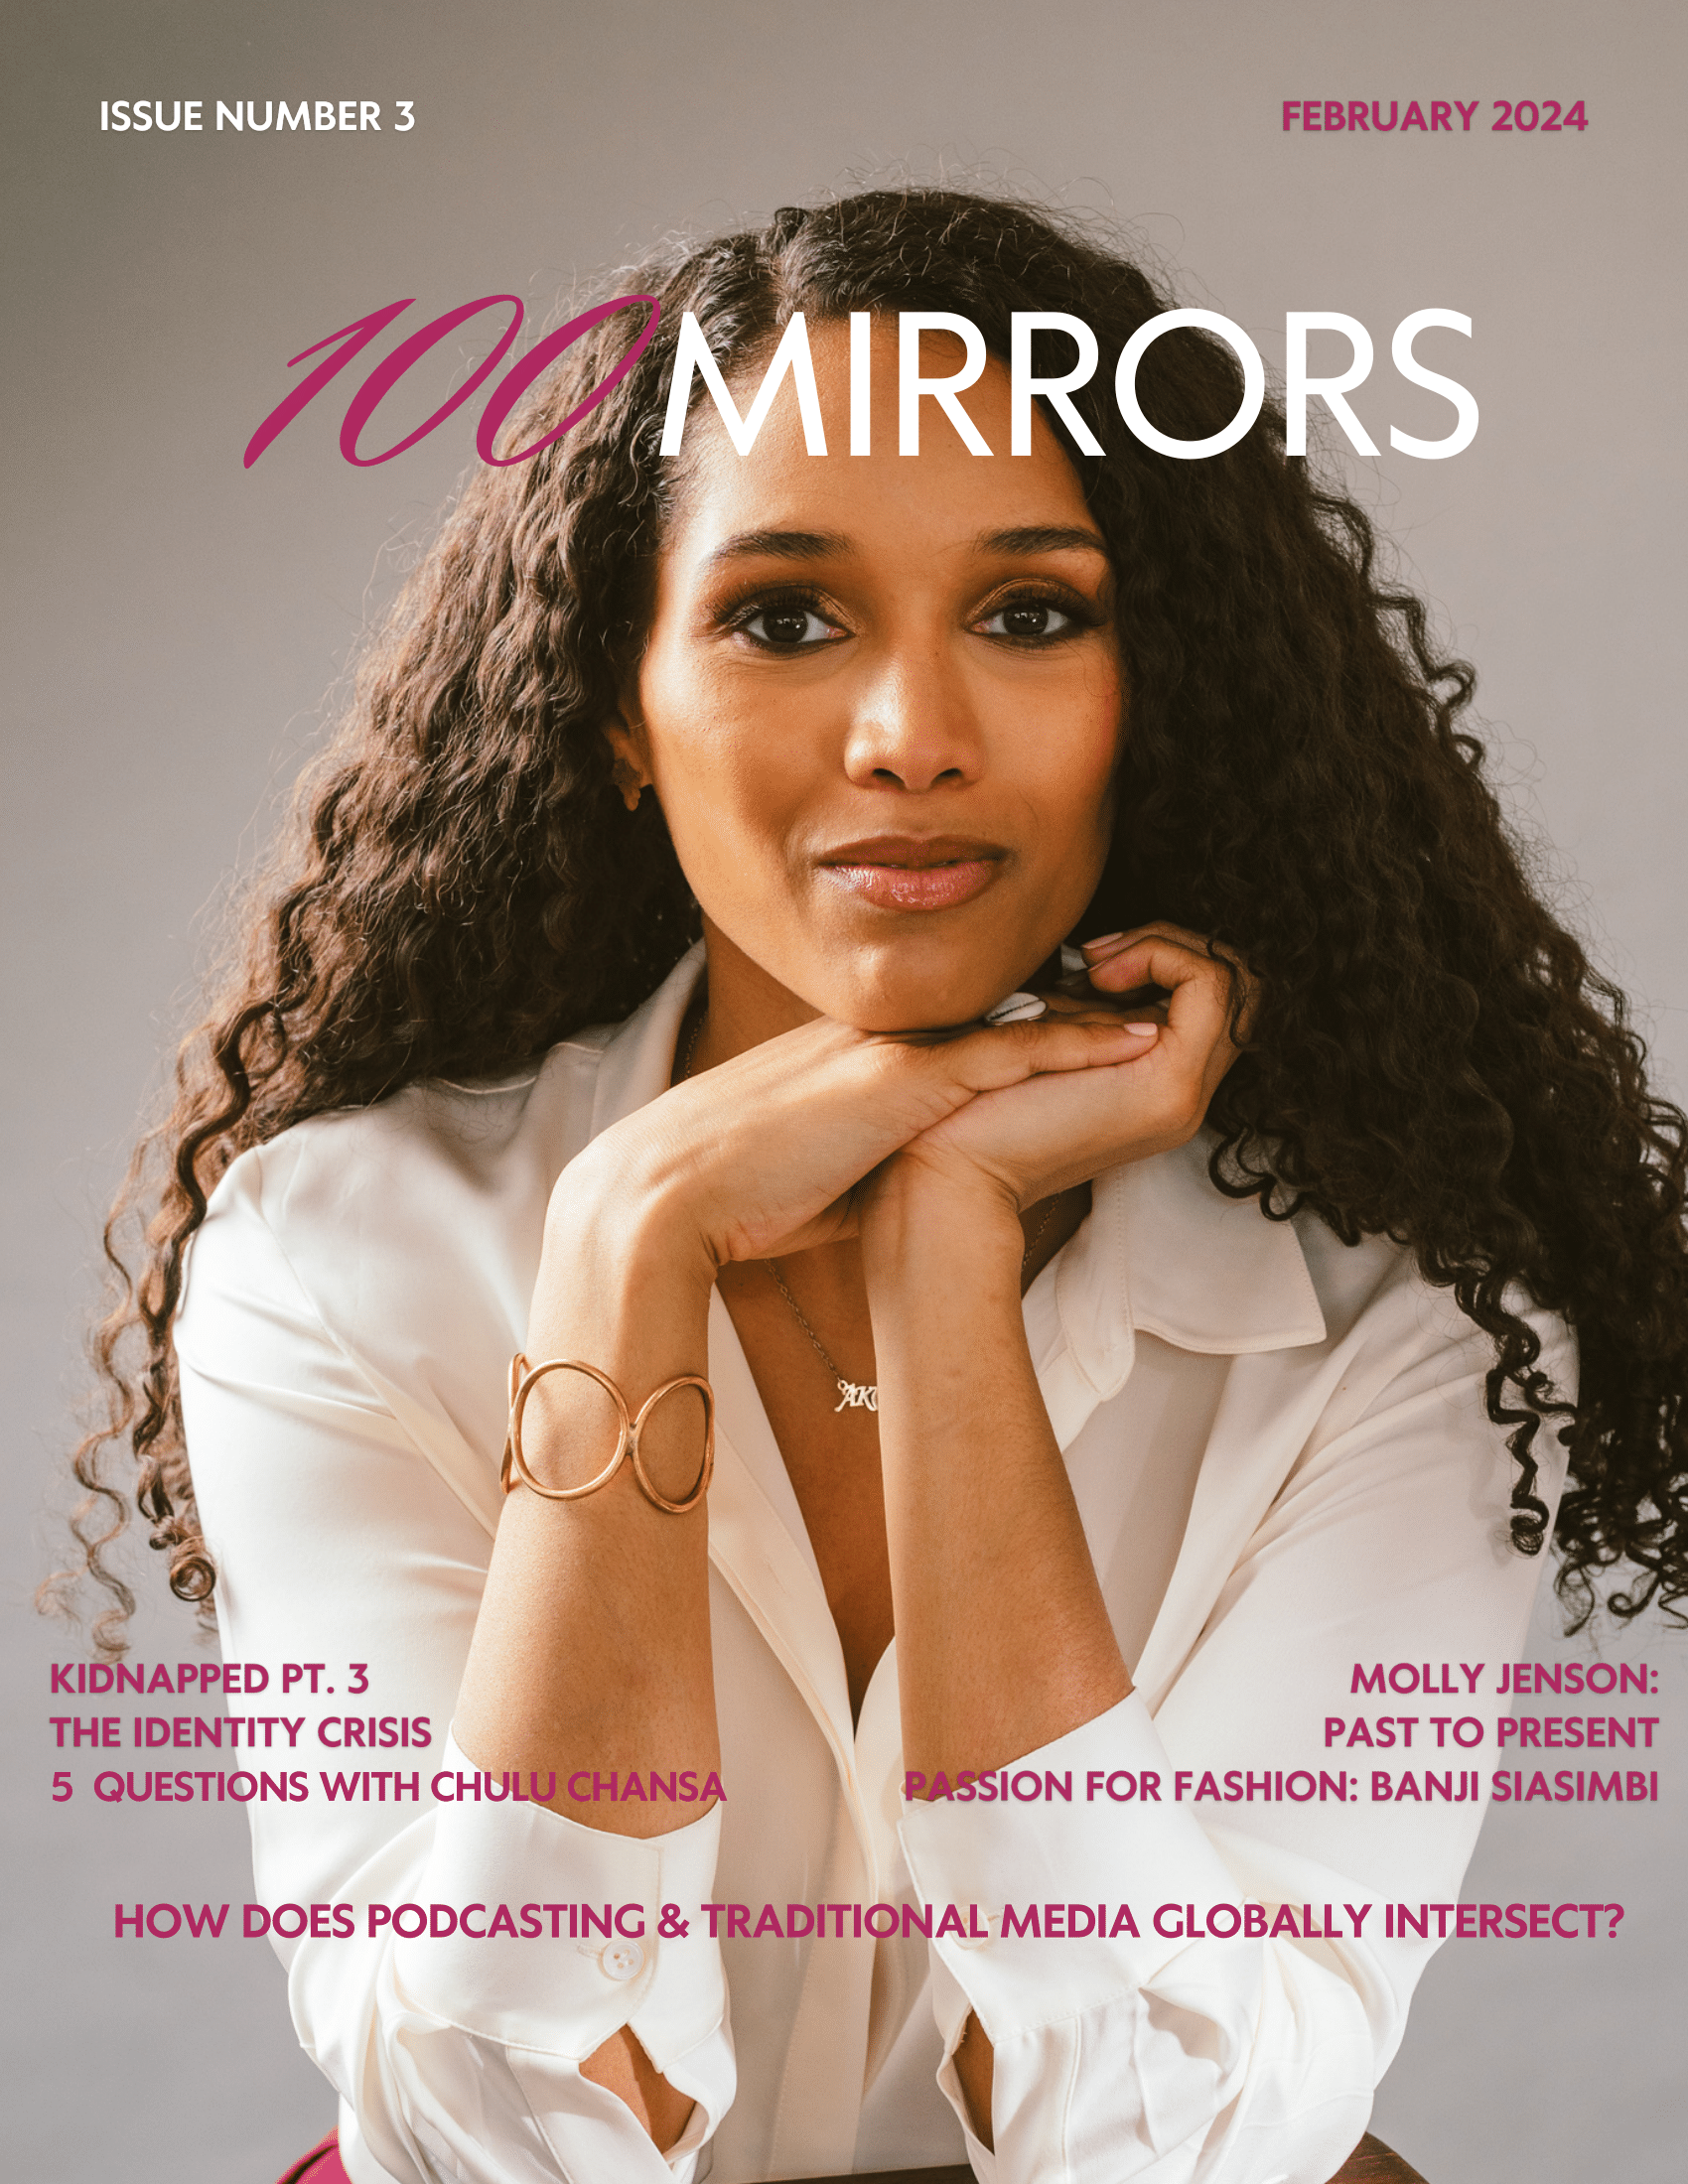 100mirrors partners with APVA to bring you issue 3 of the 100mirrors magazine!